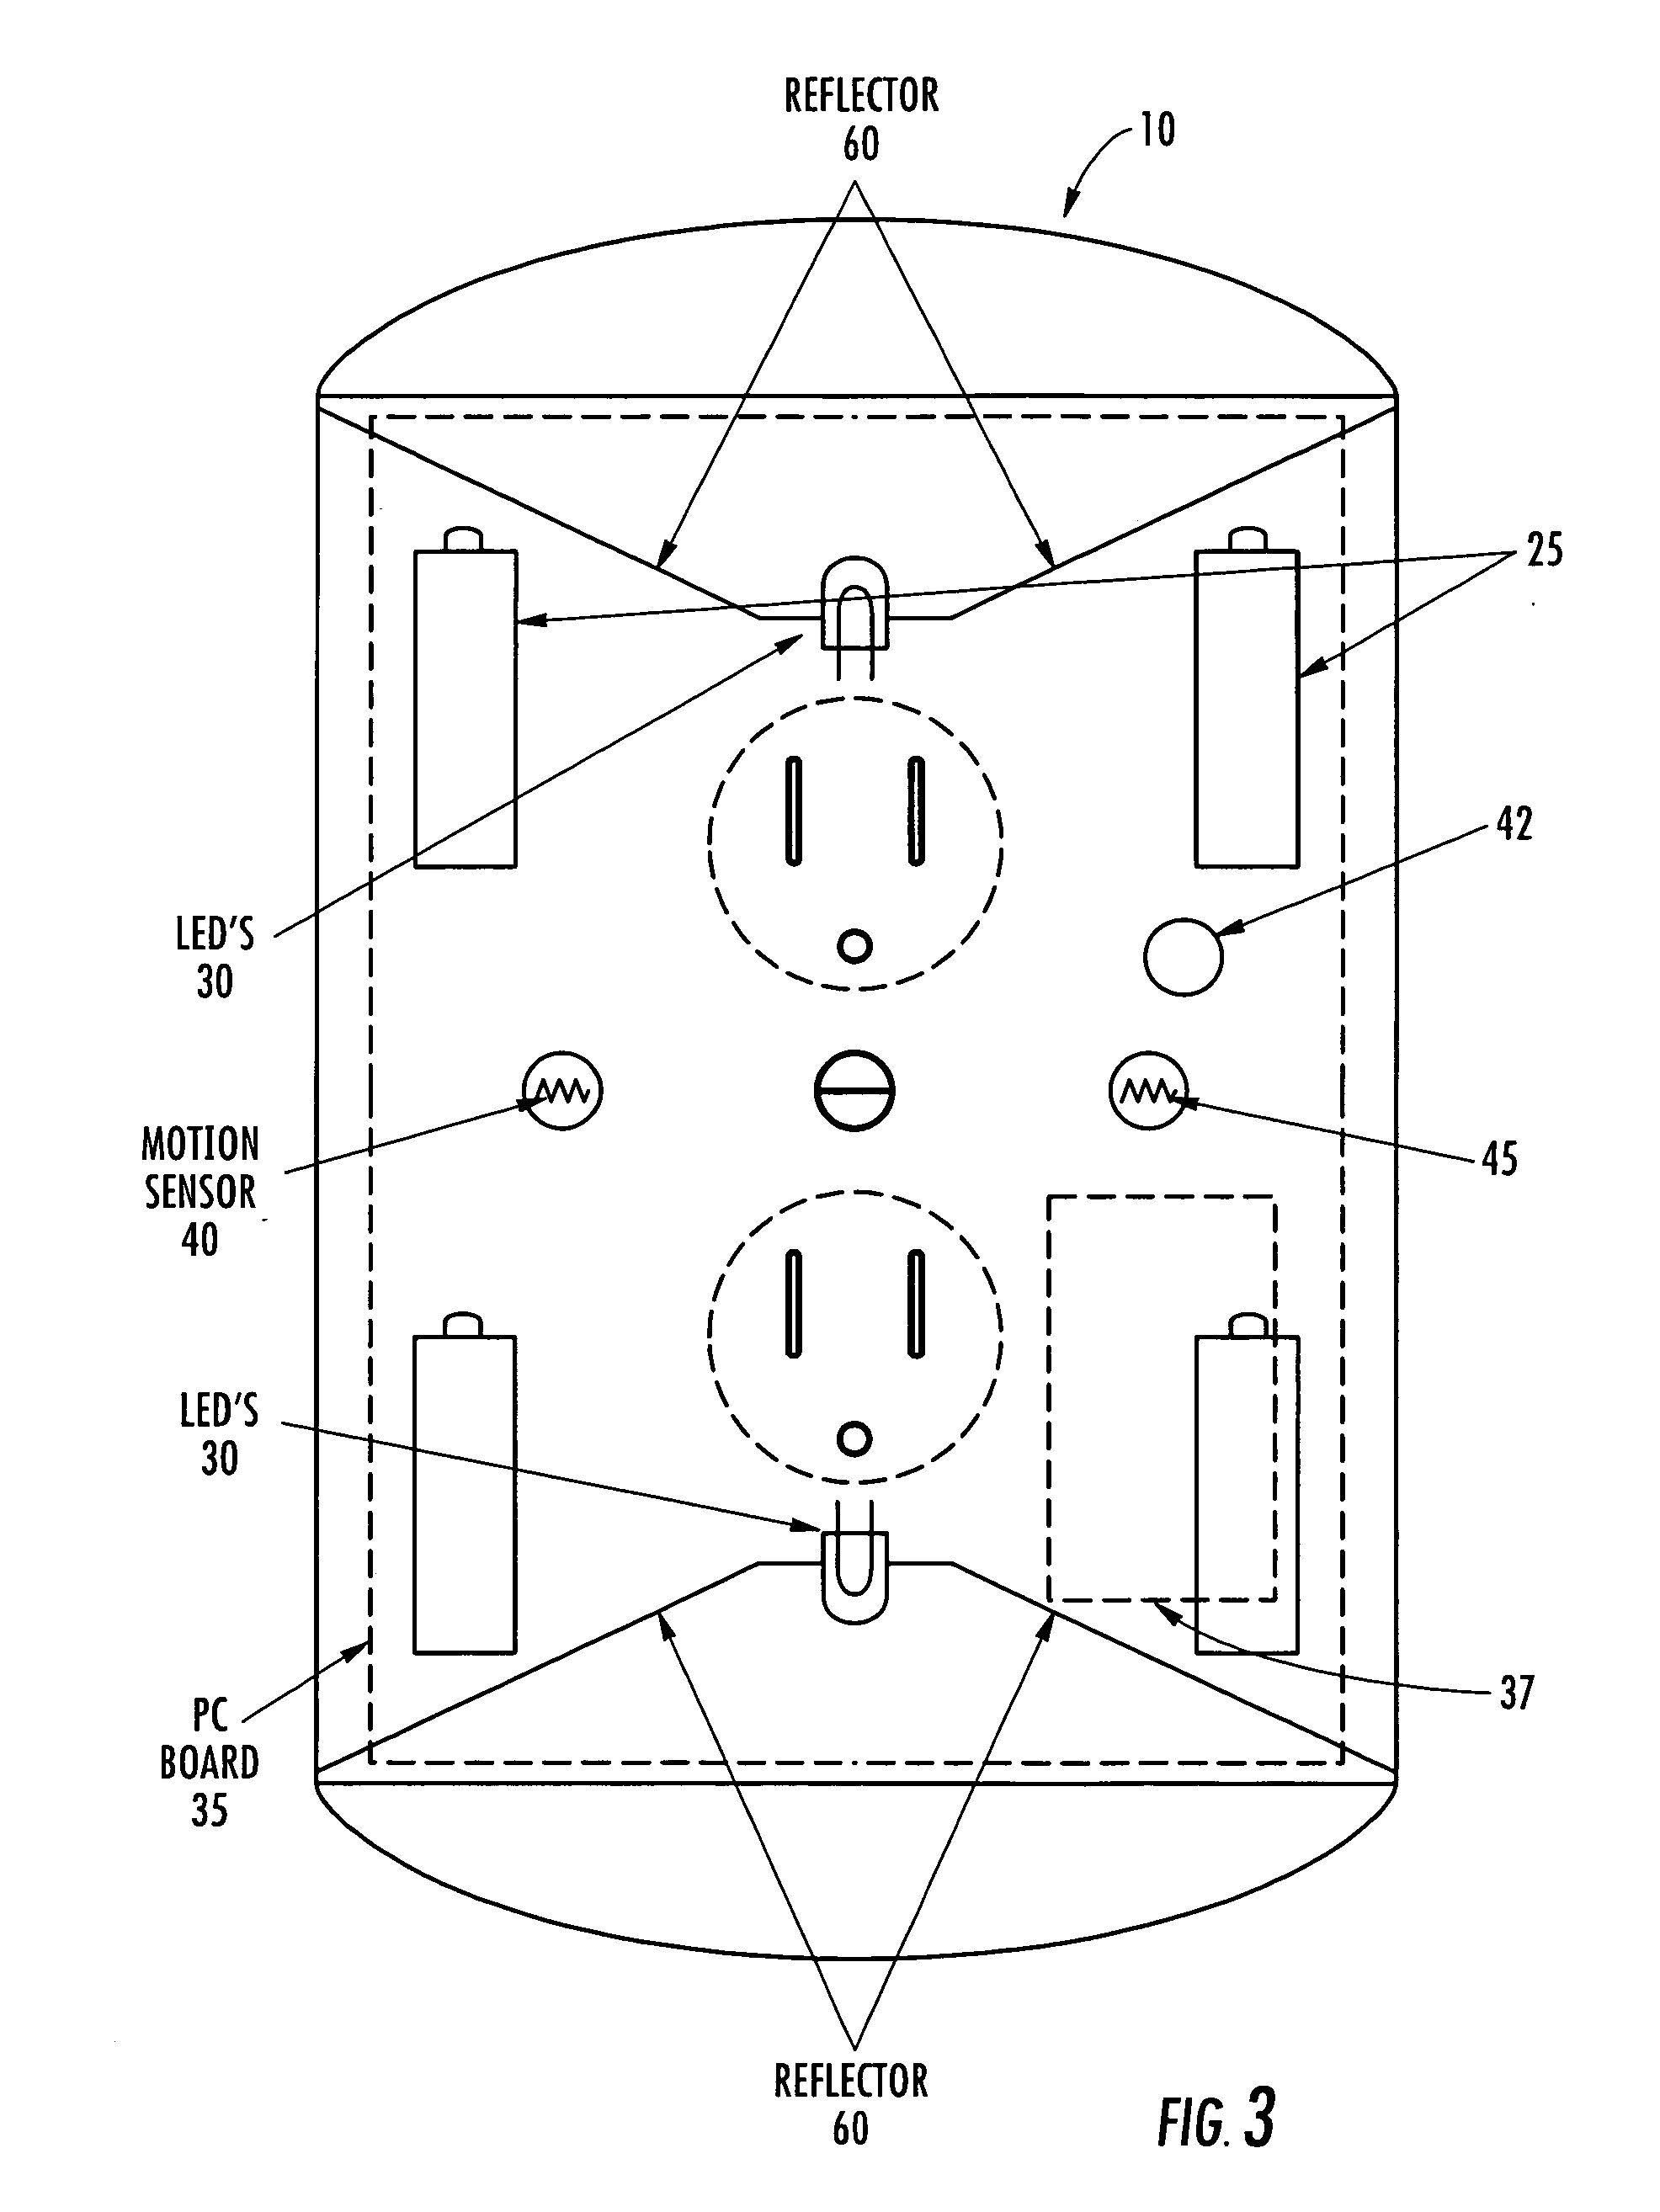 Apparatus and methods for providing emergency safety lighting